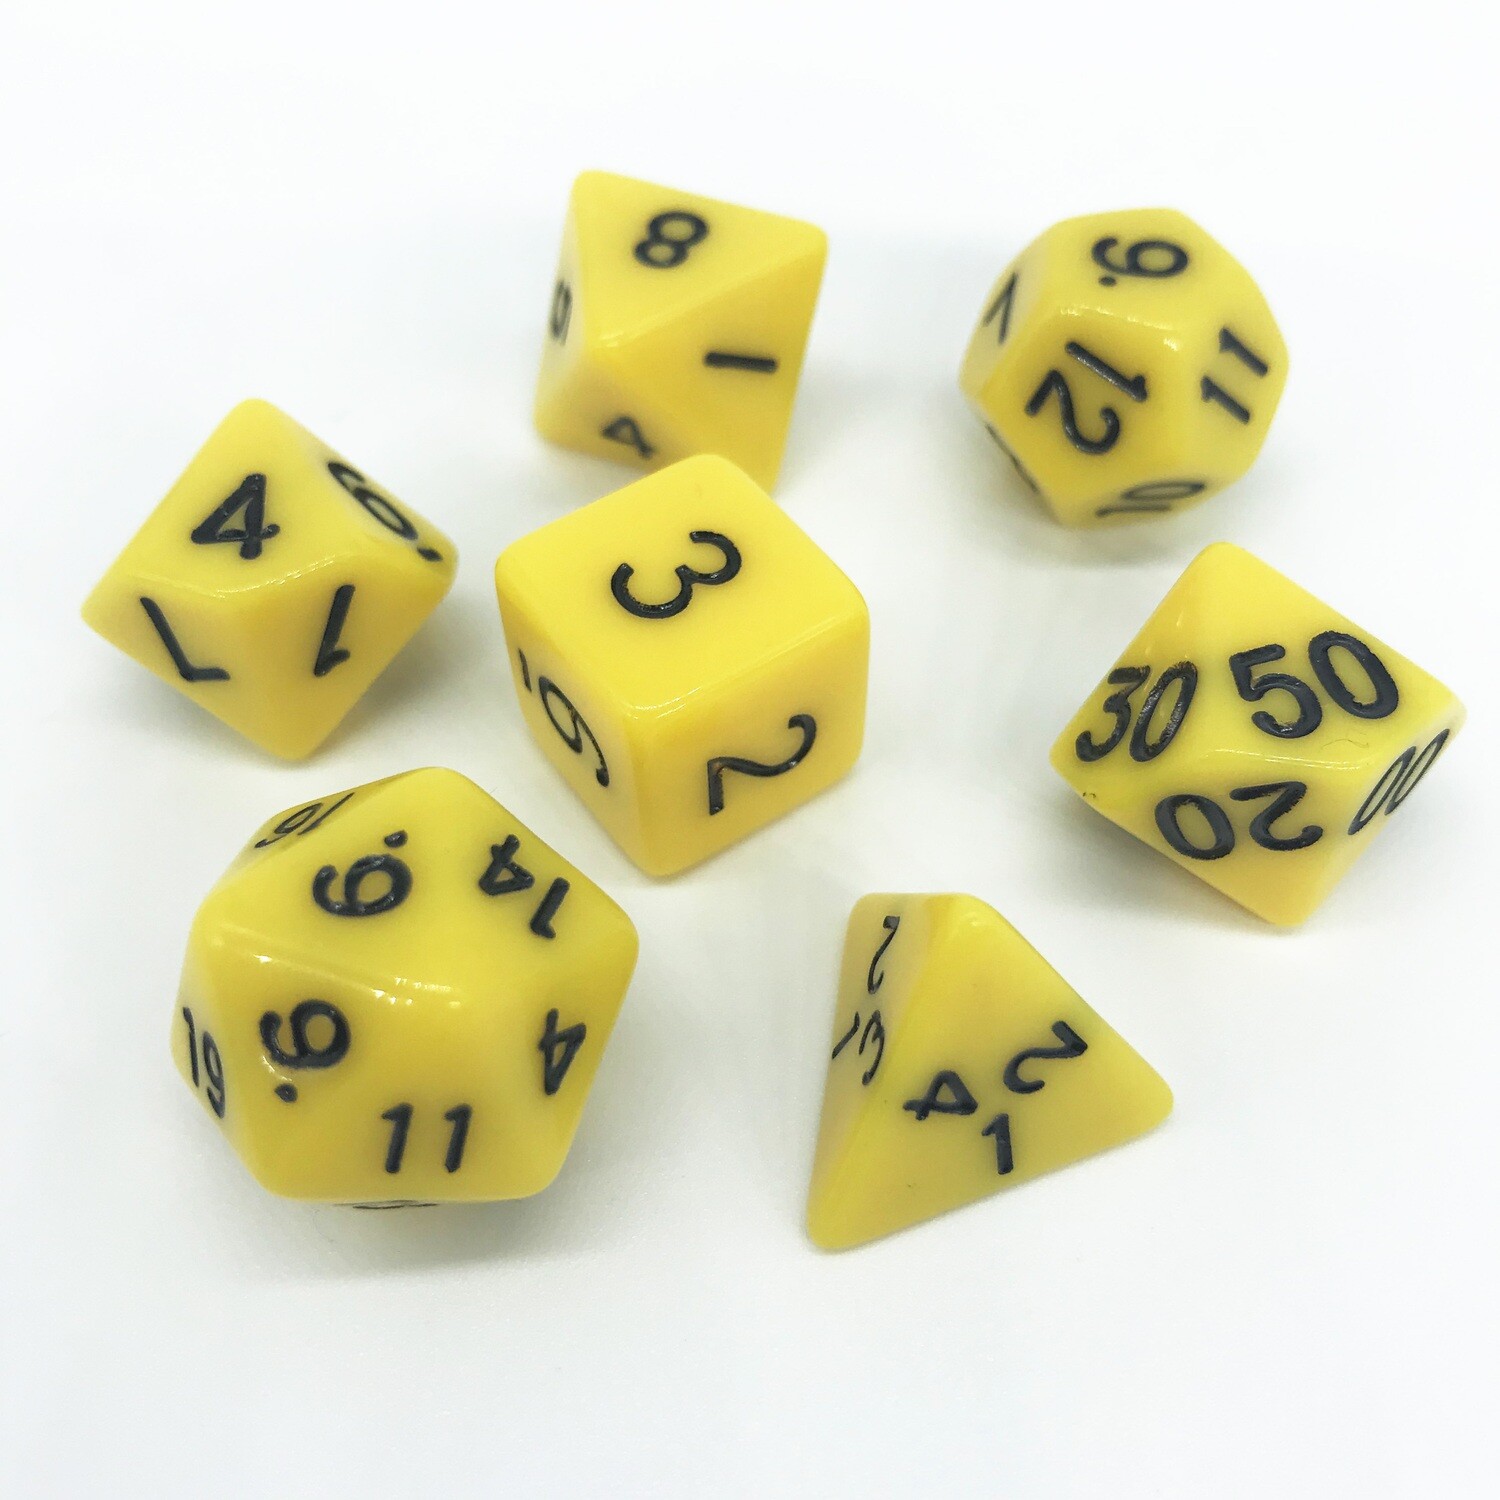 Dice Set - Yellow solid with black numbers